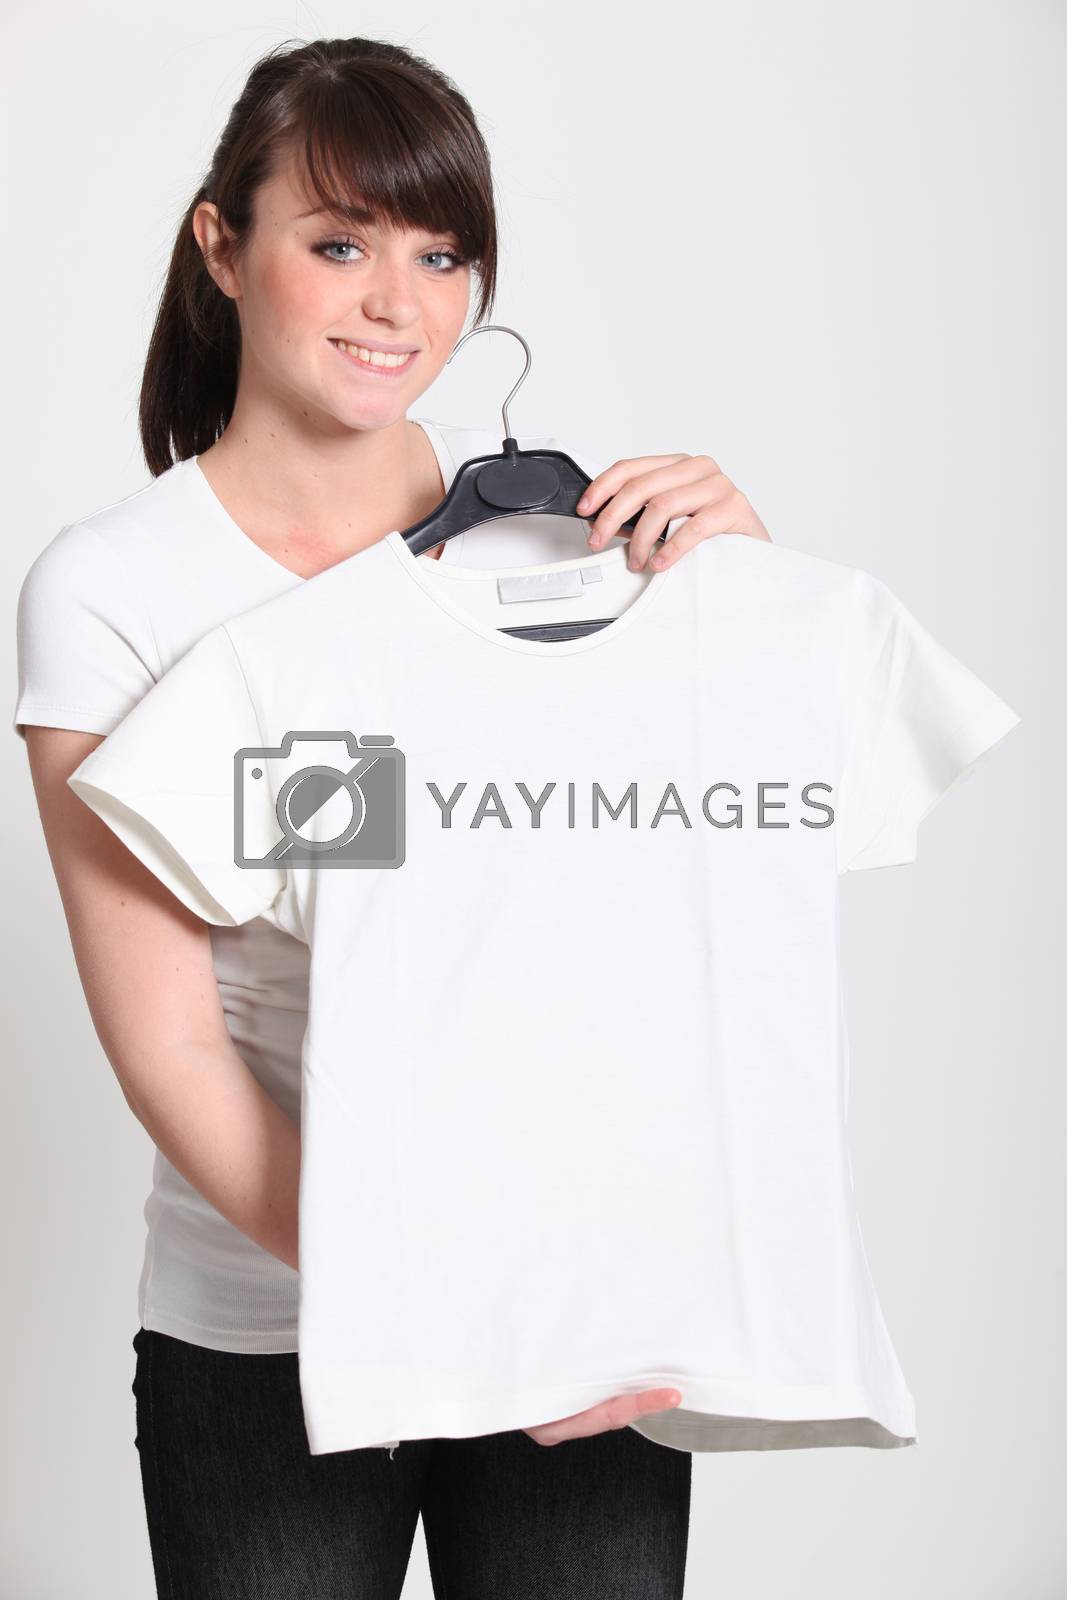 Royalty free image of Girl with a white t-shirt on a hanger by phovoir